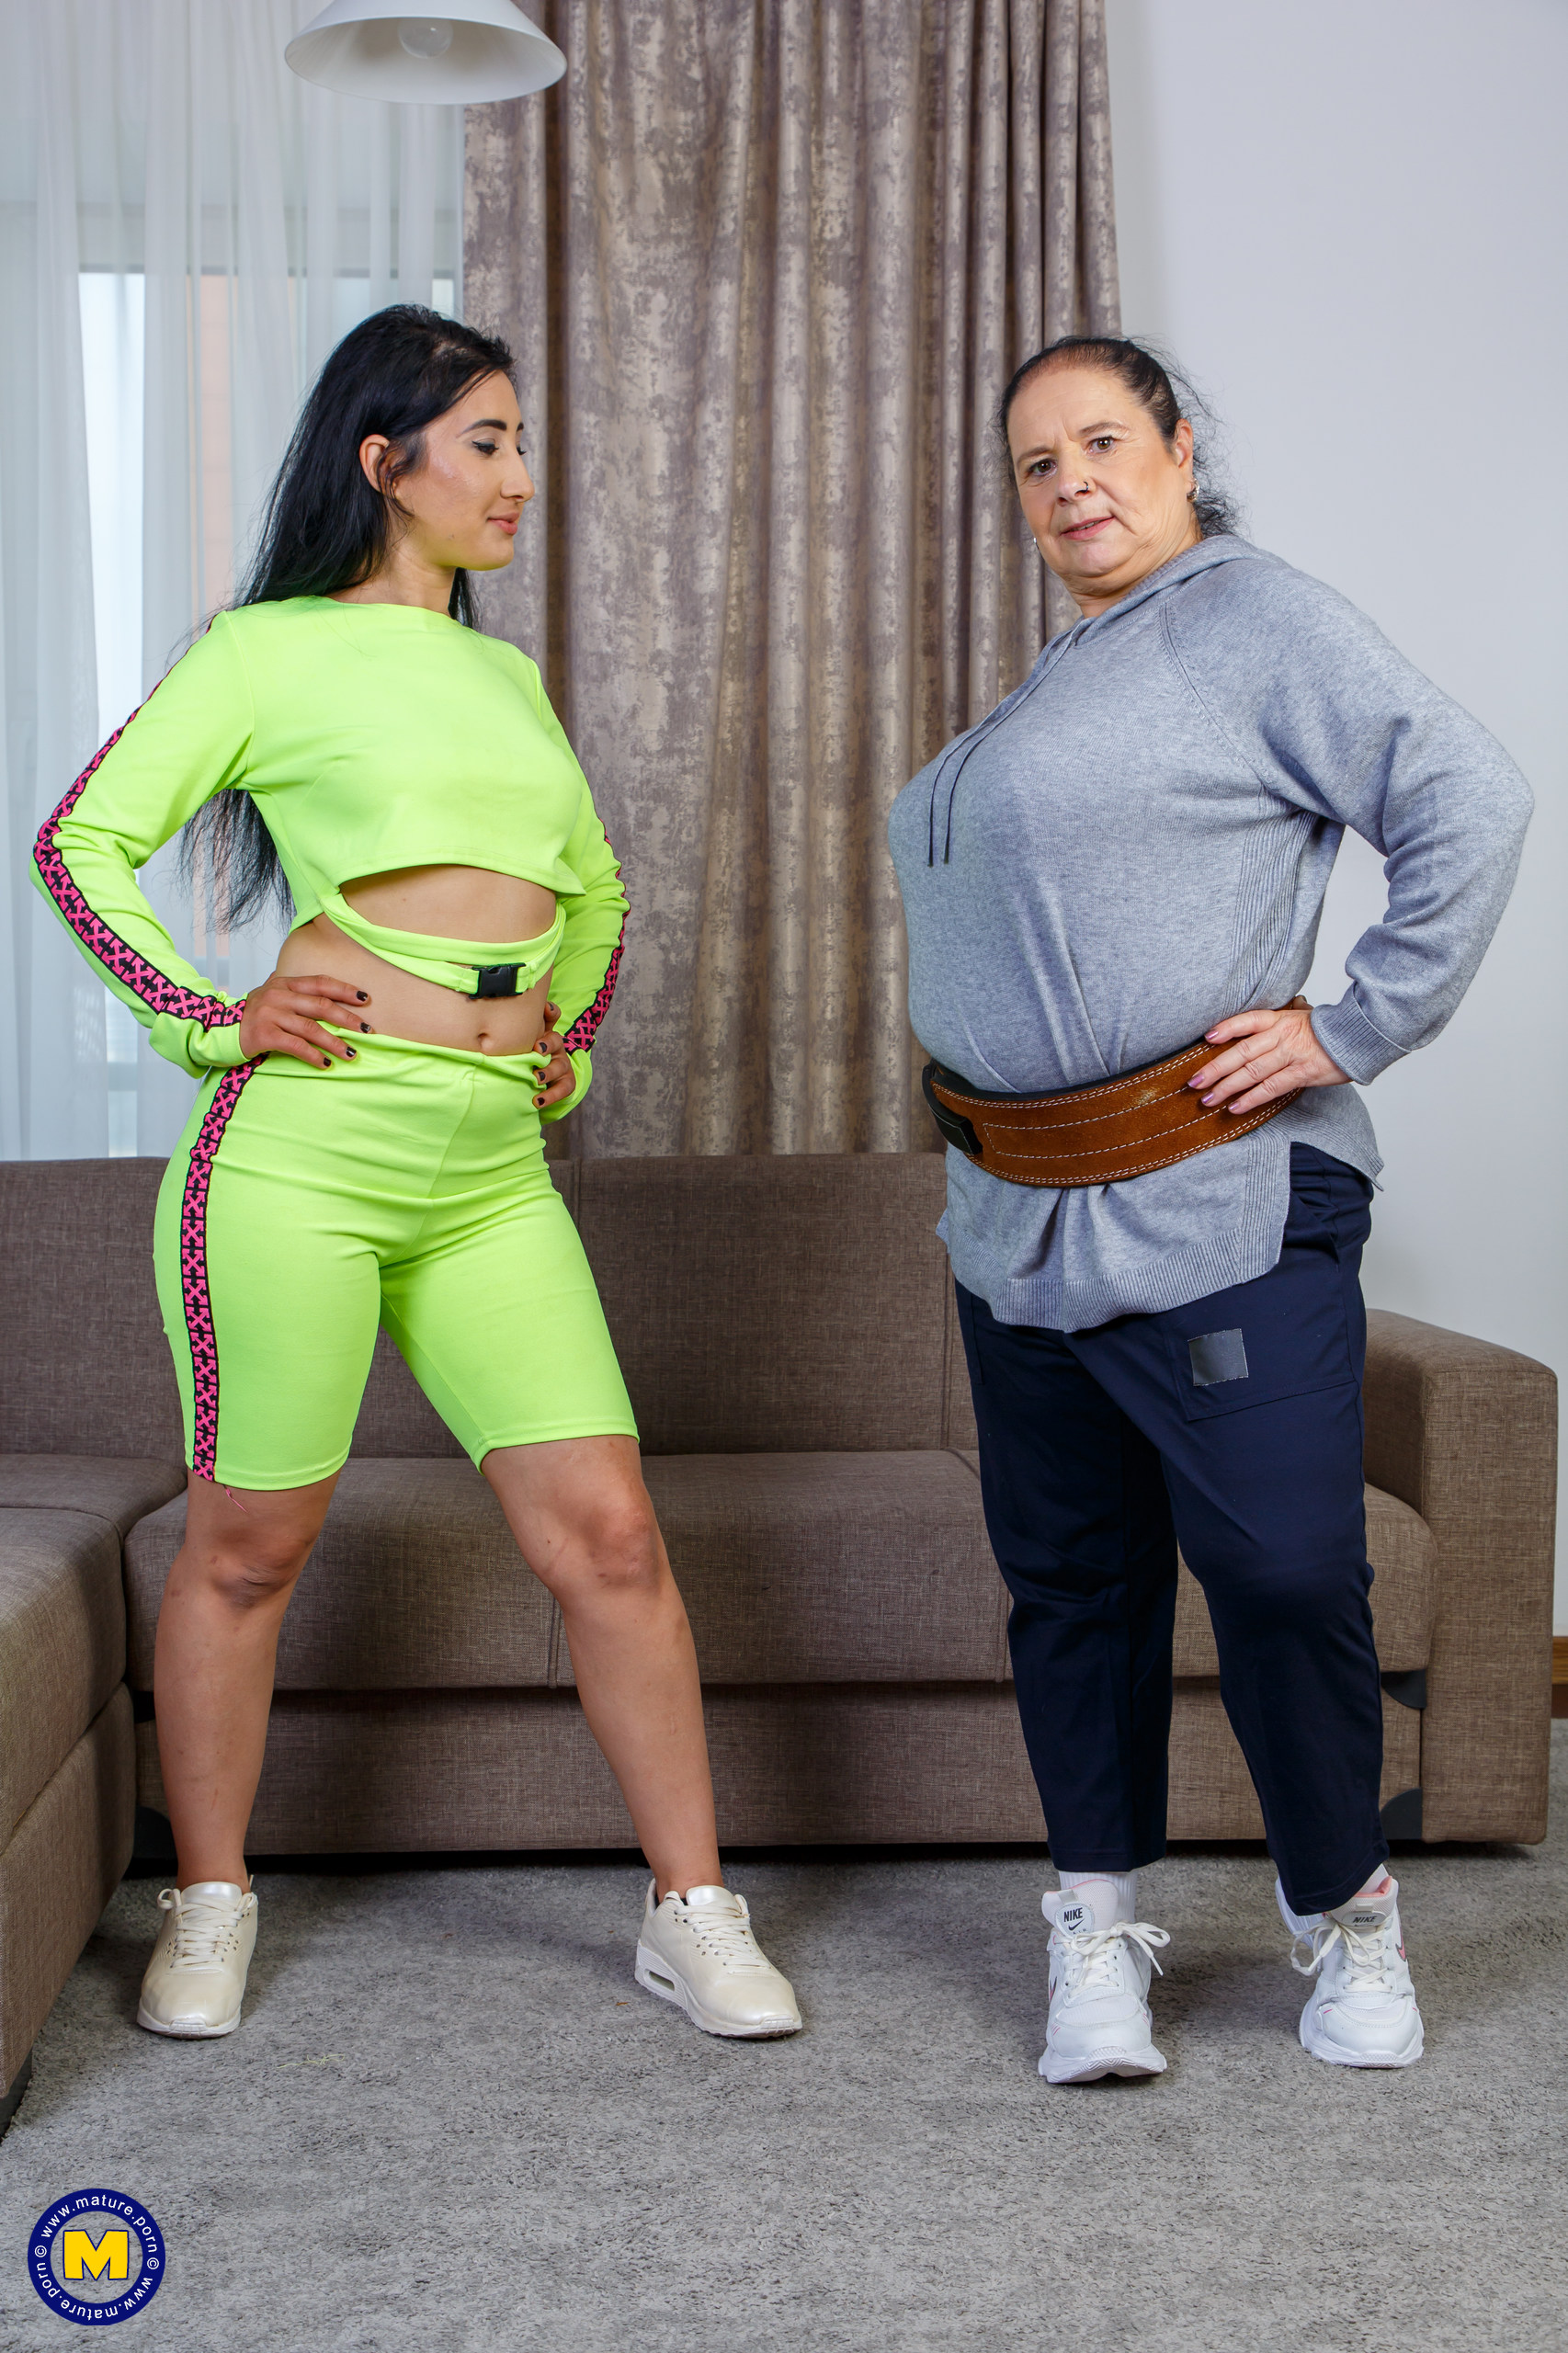 Hot Bbw Brazil - Old and Young Lesbians BBW Abby Tits and hot young Andra Brazil work out  and then some - Mature.nl